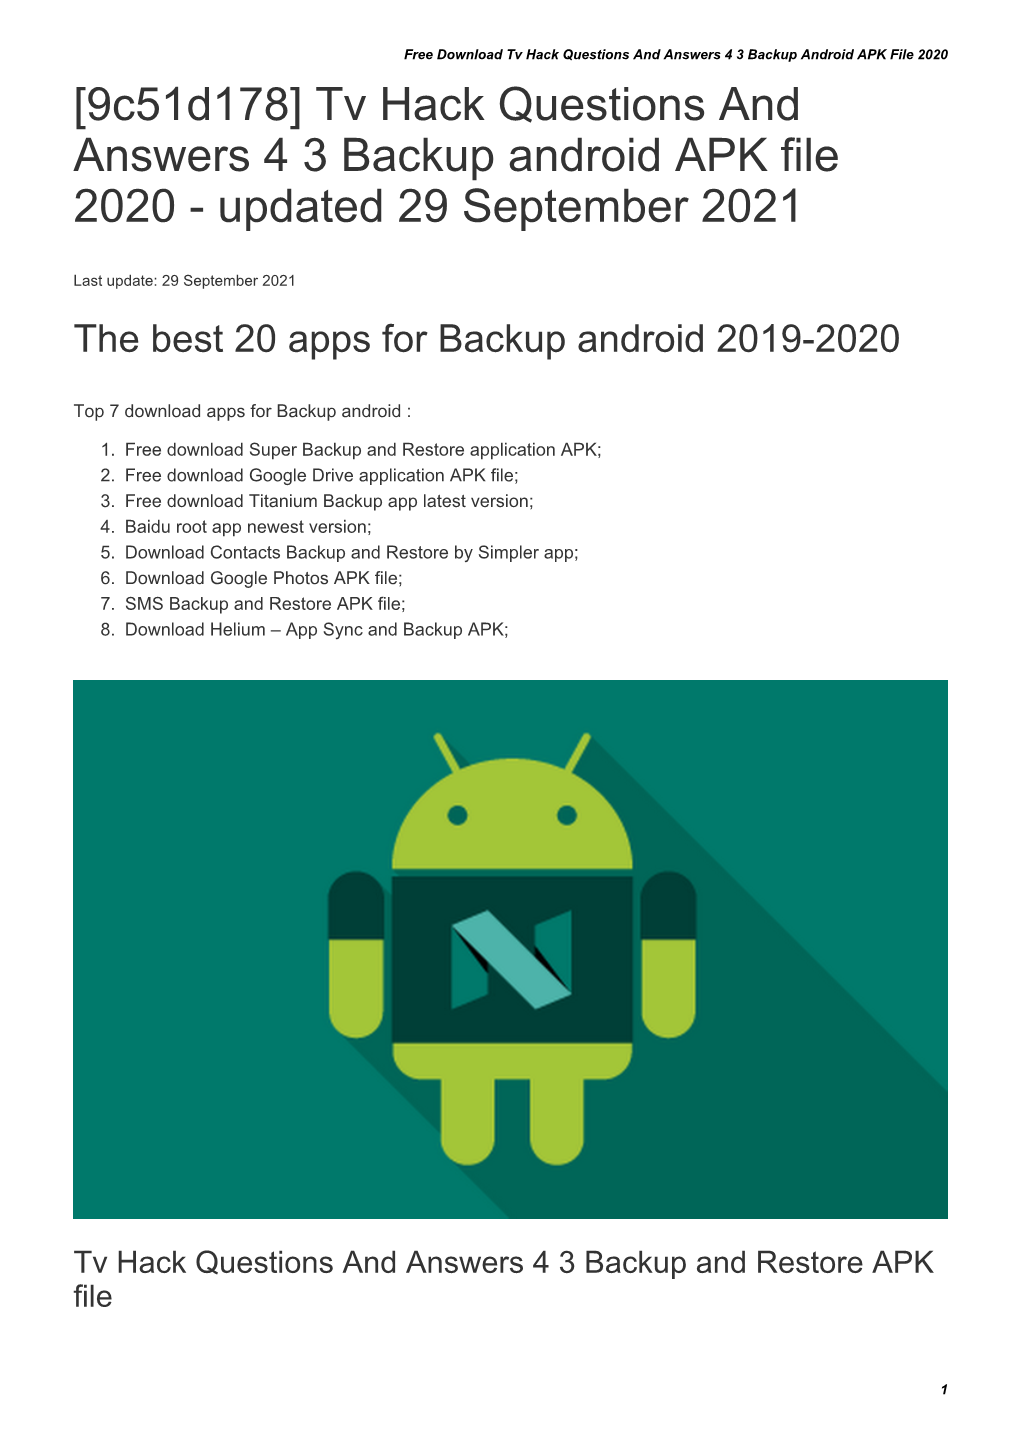 Tv Hack Questions and Answers 4 3 Backup Android APK File 2020 [9C51d178] Tv Hack Questions and Answers 4 3 Backup Android APK File 2020 - Updated 29 September 2021